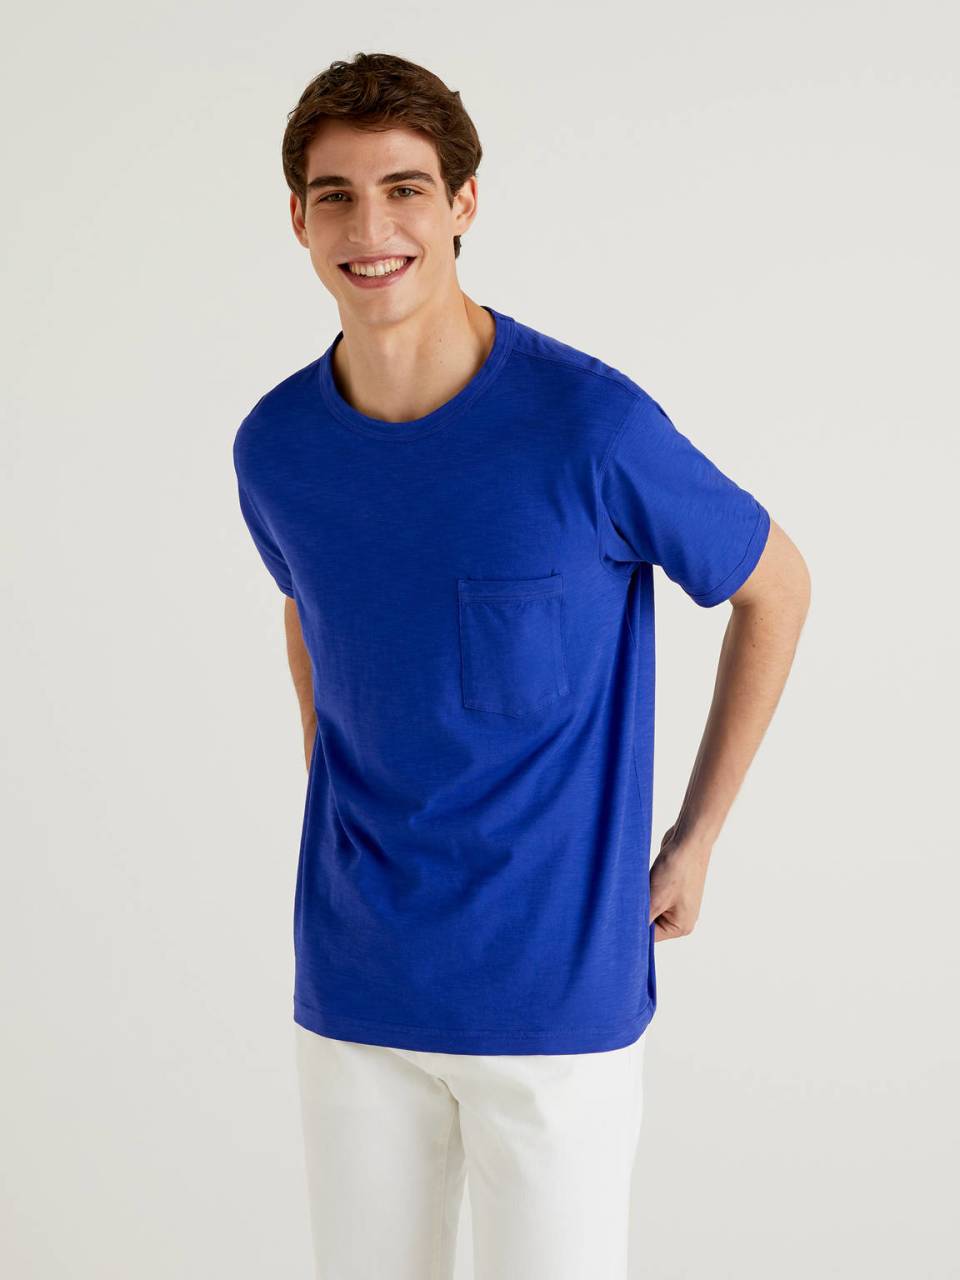 Benetton Cotton t-shirt with pocket. 1